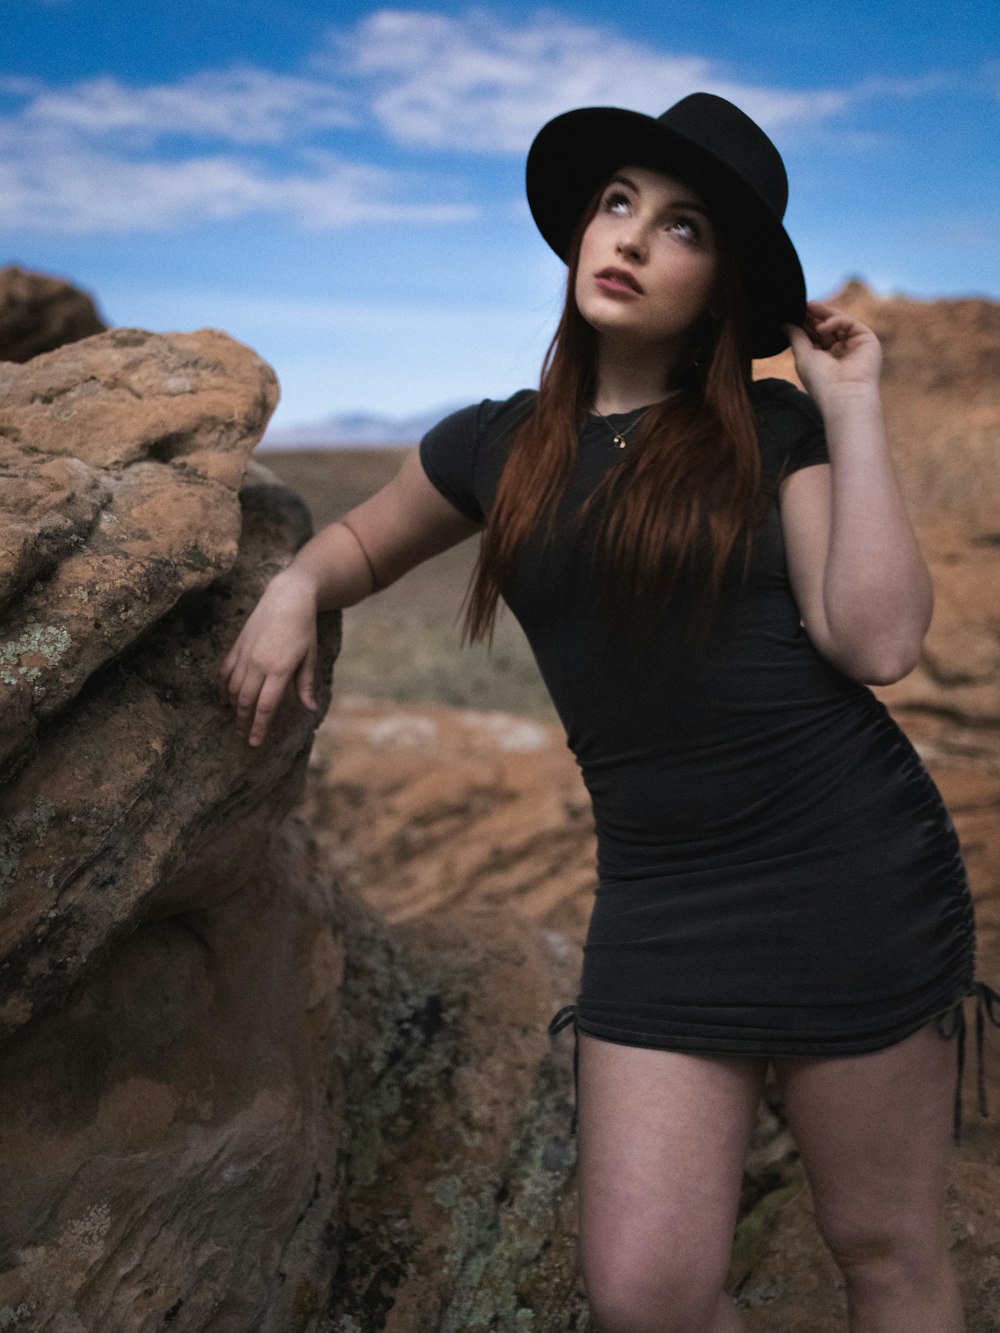 woman in black tank top and black shorts standing beside brown rock during daytime